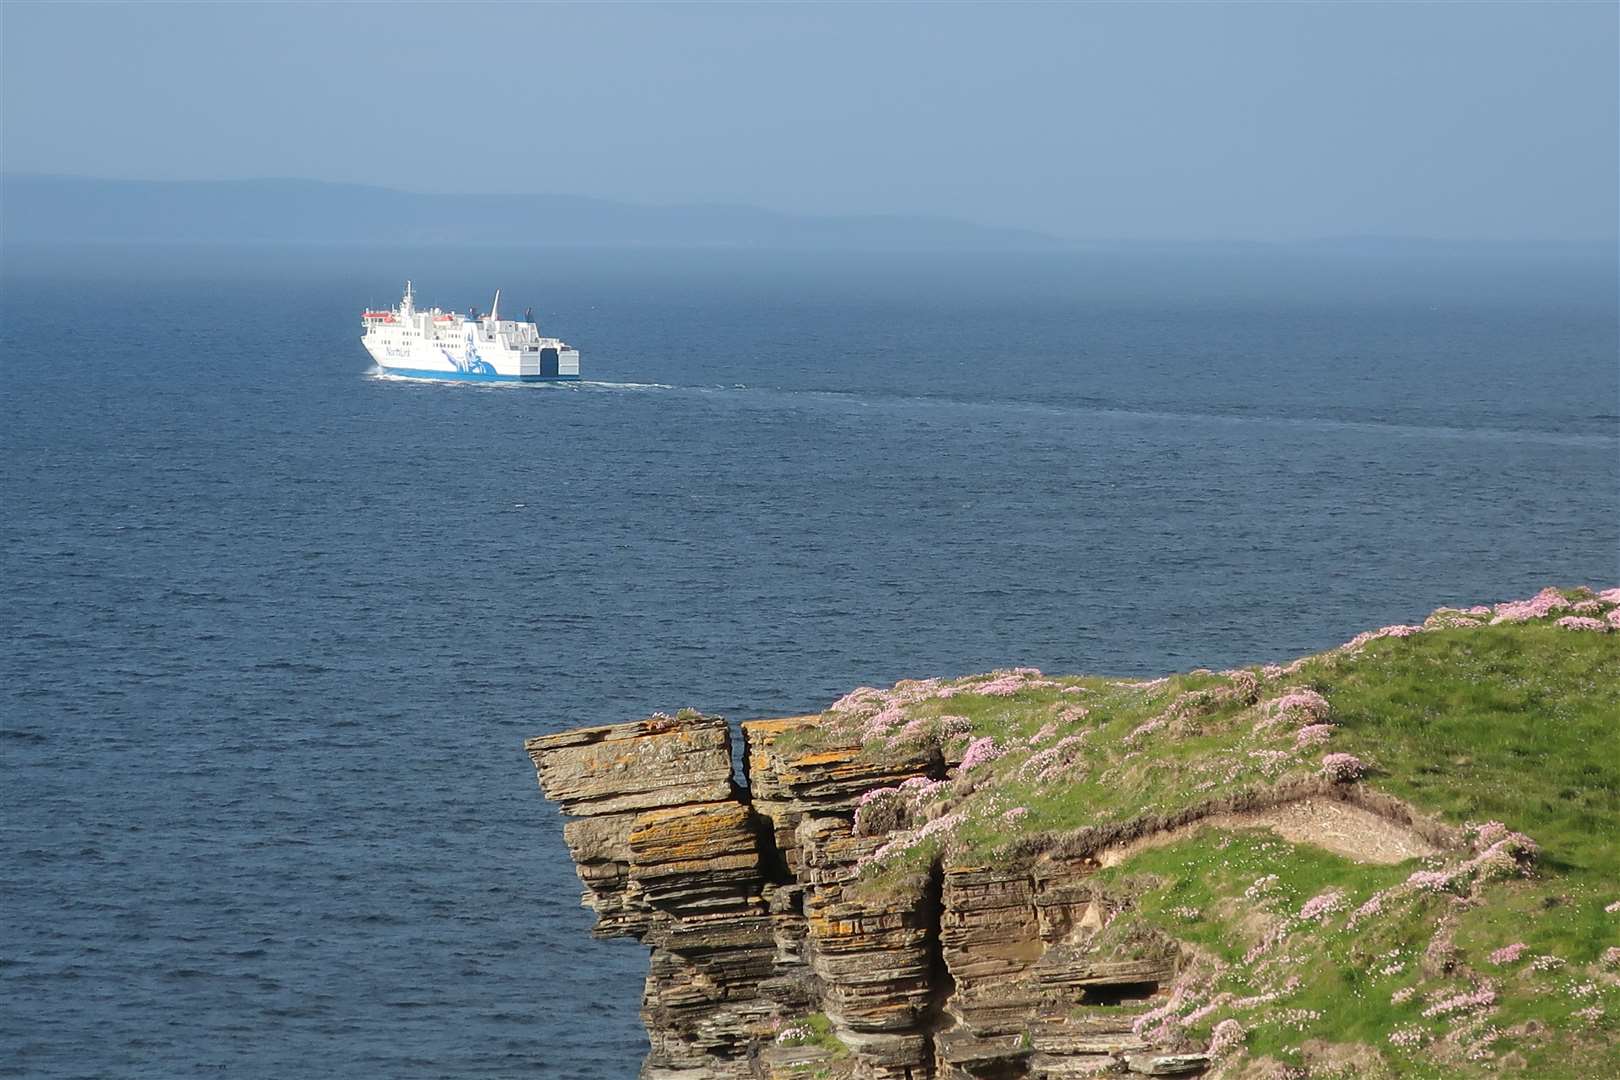 The NorthLink ferry Hamnavoe heading out of Thurso Bay towards Orkney, as seen from Holborn Head. Picture: John Davidson